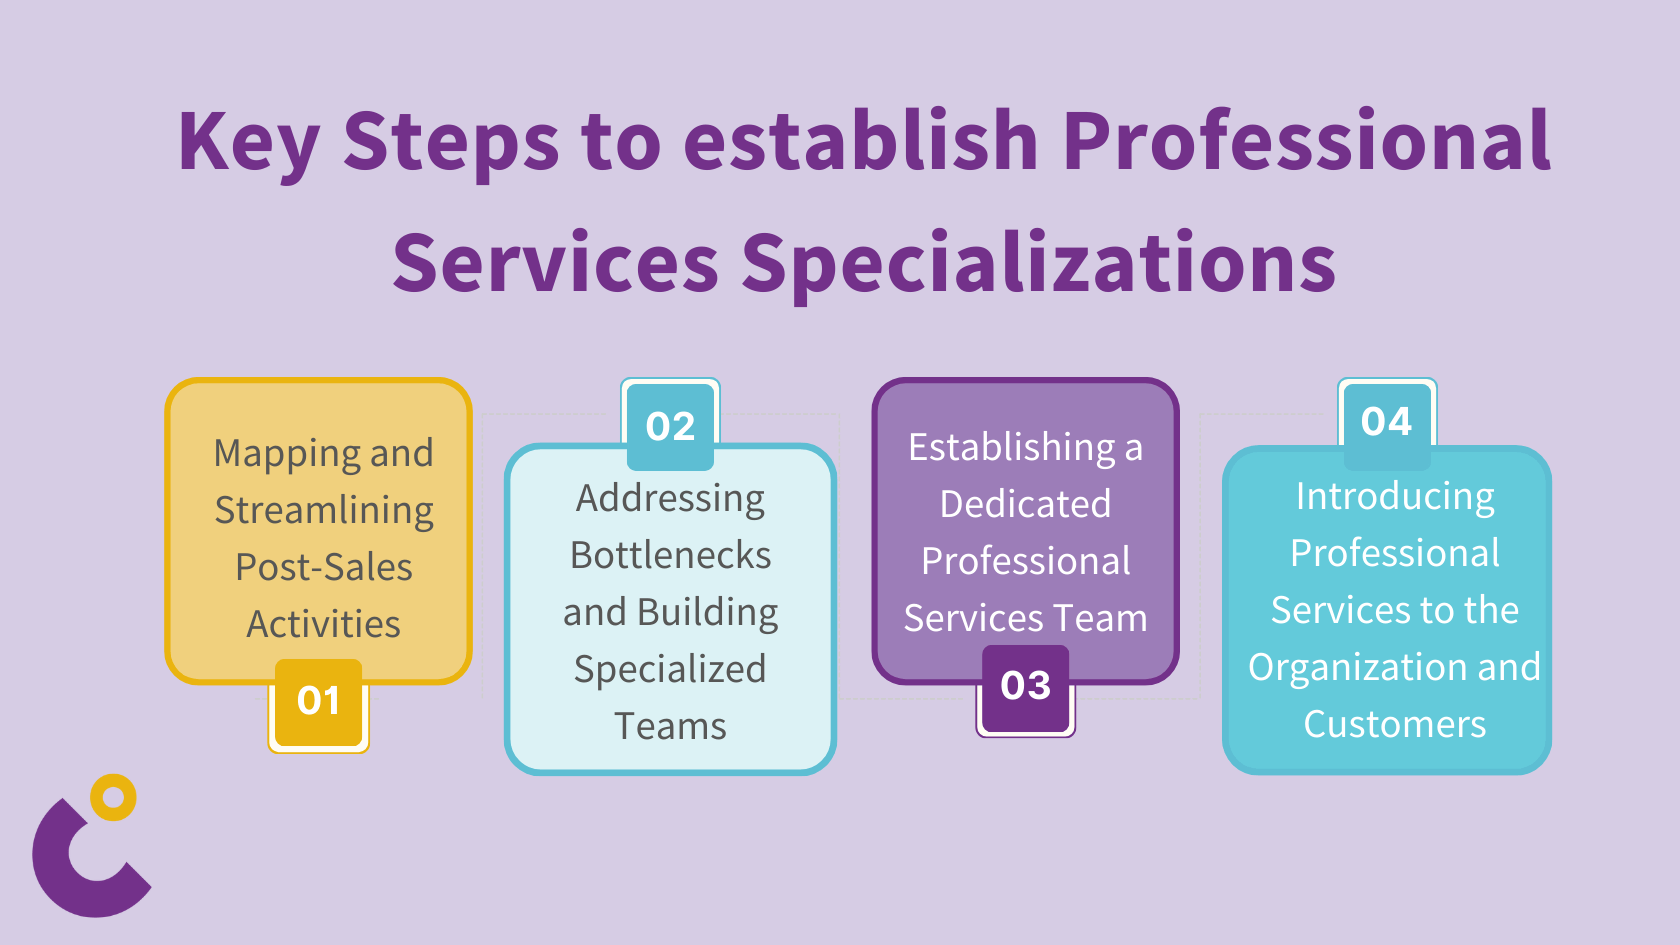 Key Steps to establish Professional Services Specializations